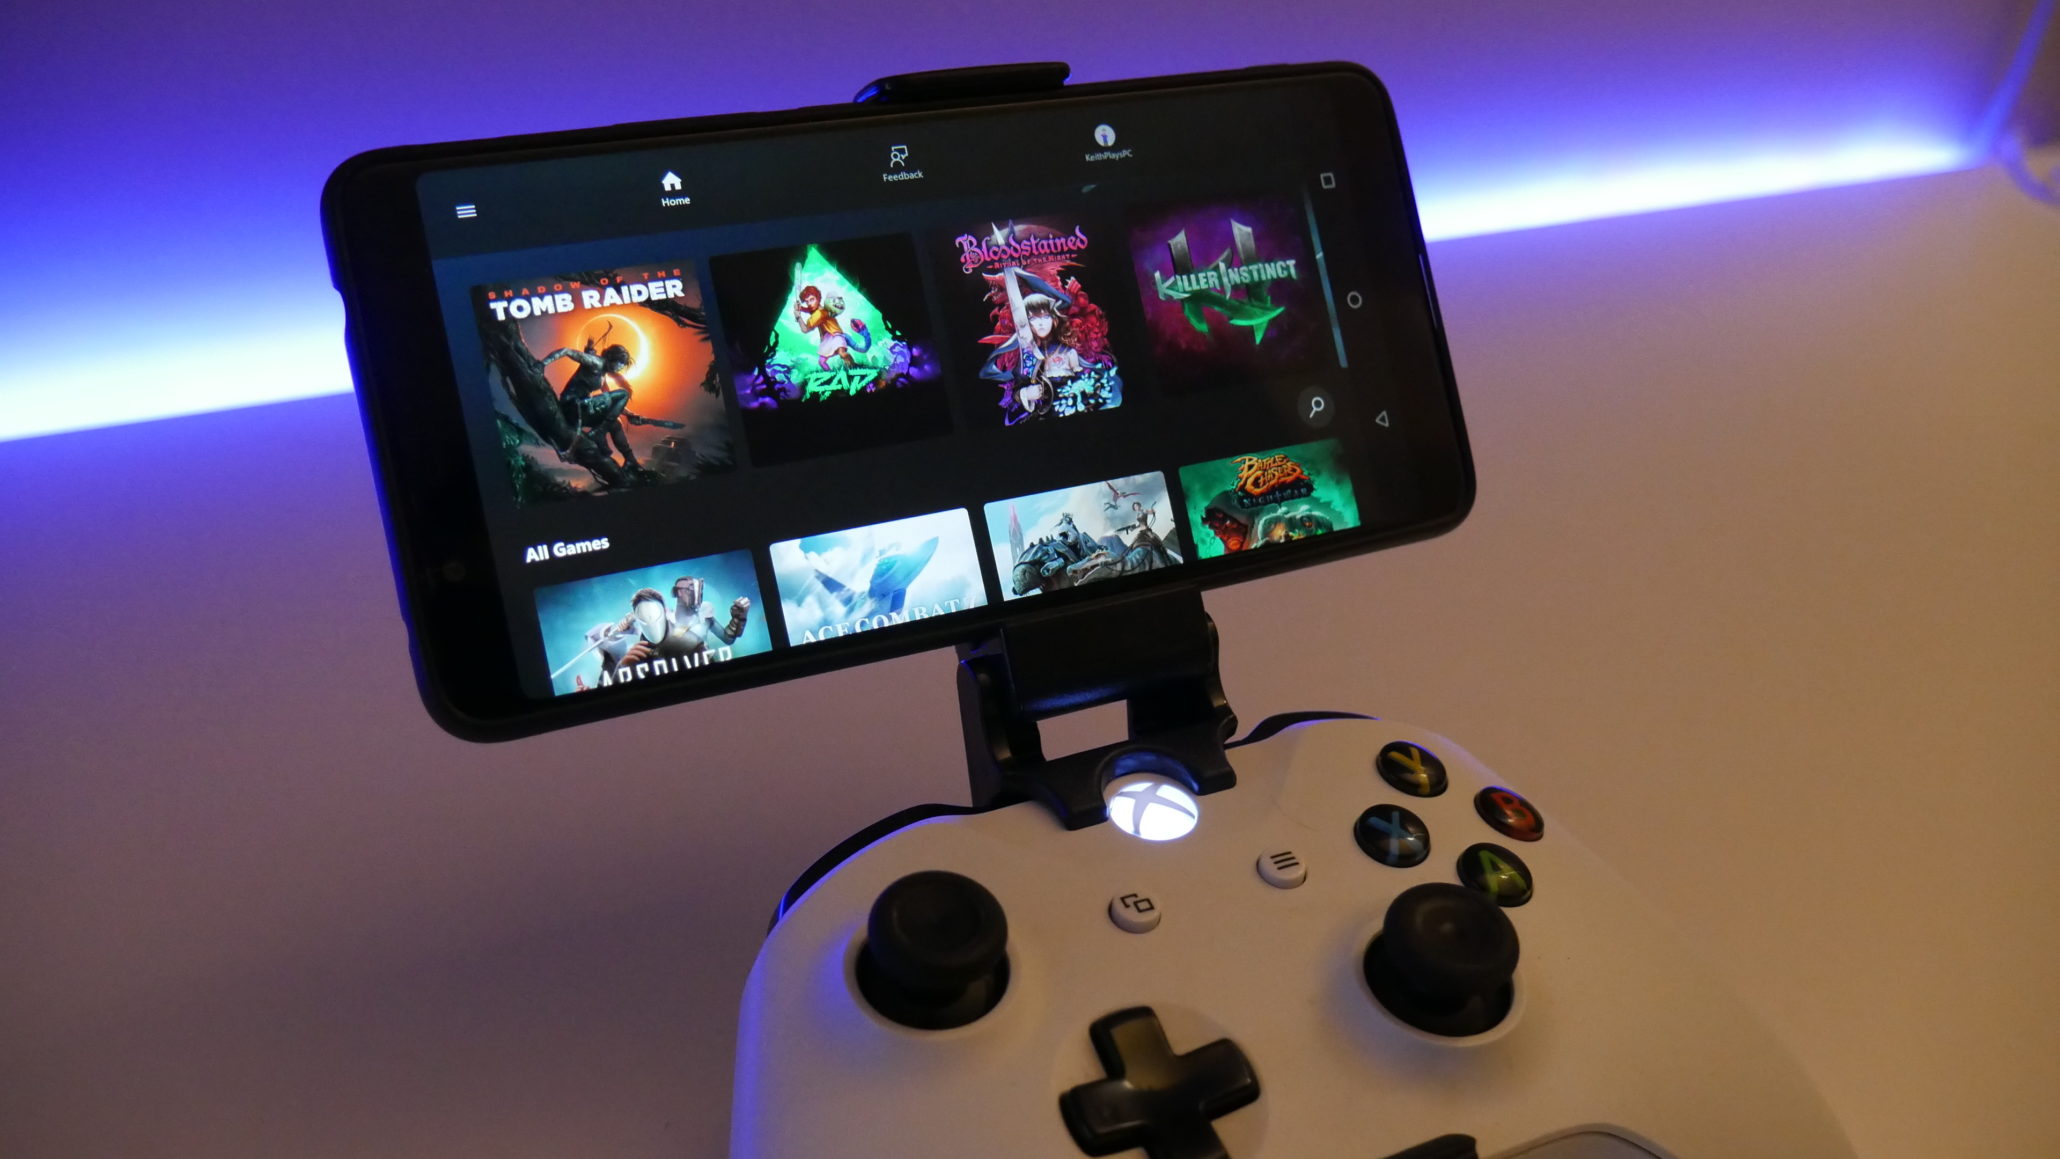 Microsoft's xCloud game streaming will launch on September 15th on Android  - The Verge